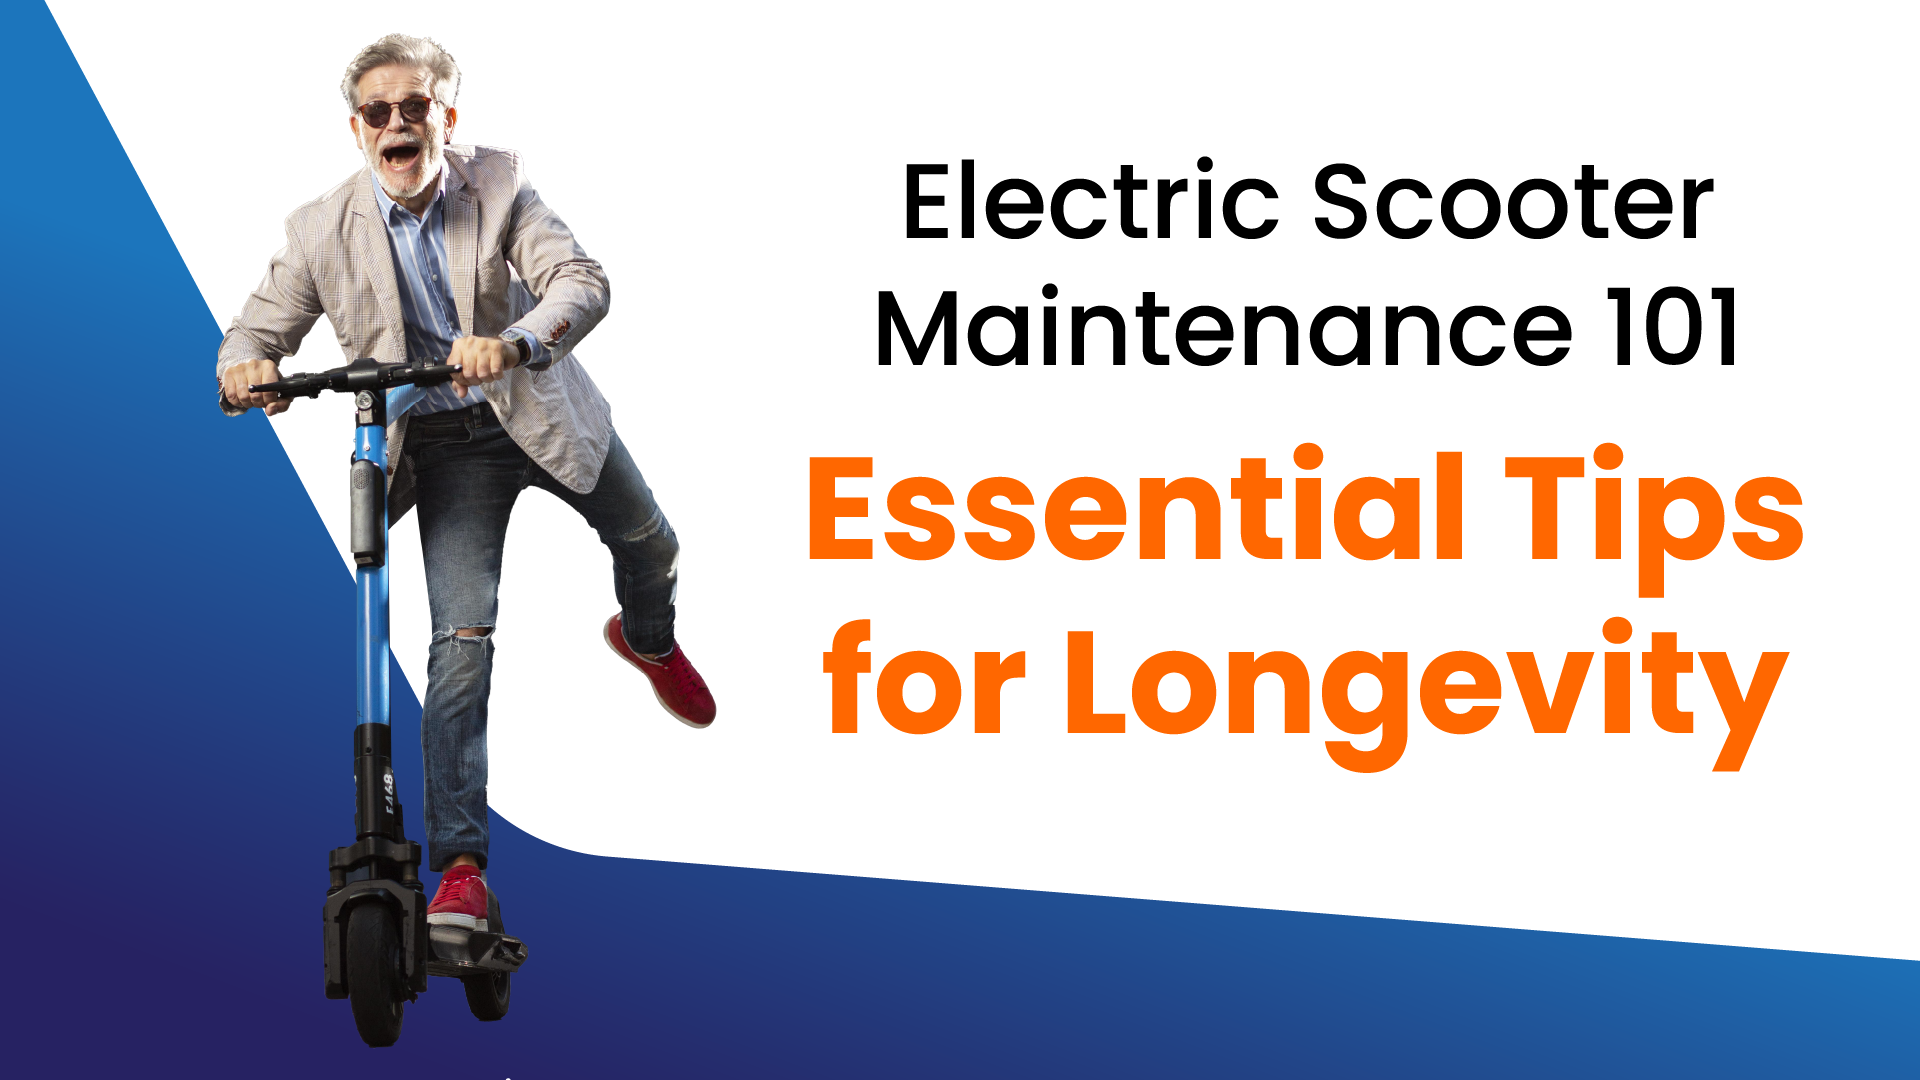 Electric Scooter Maintenance 101: Essential Tips for Longevity